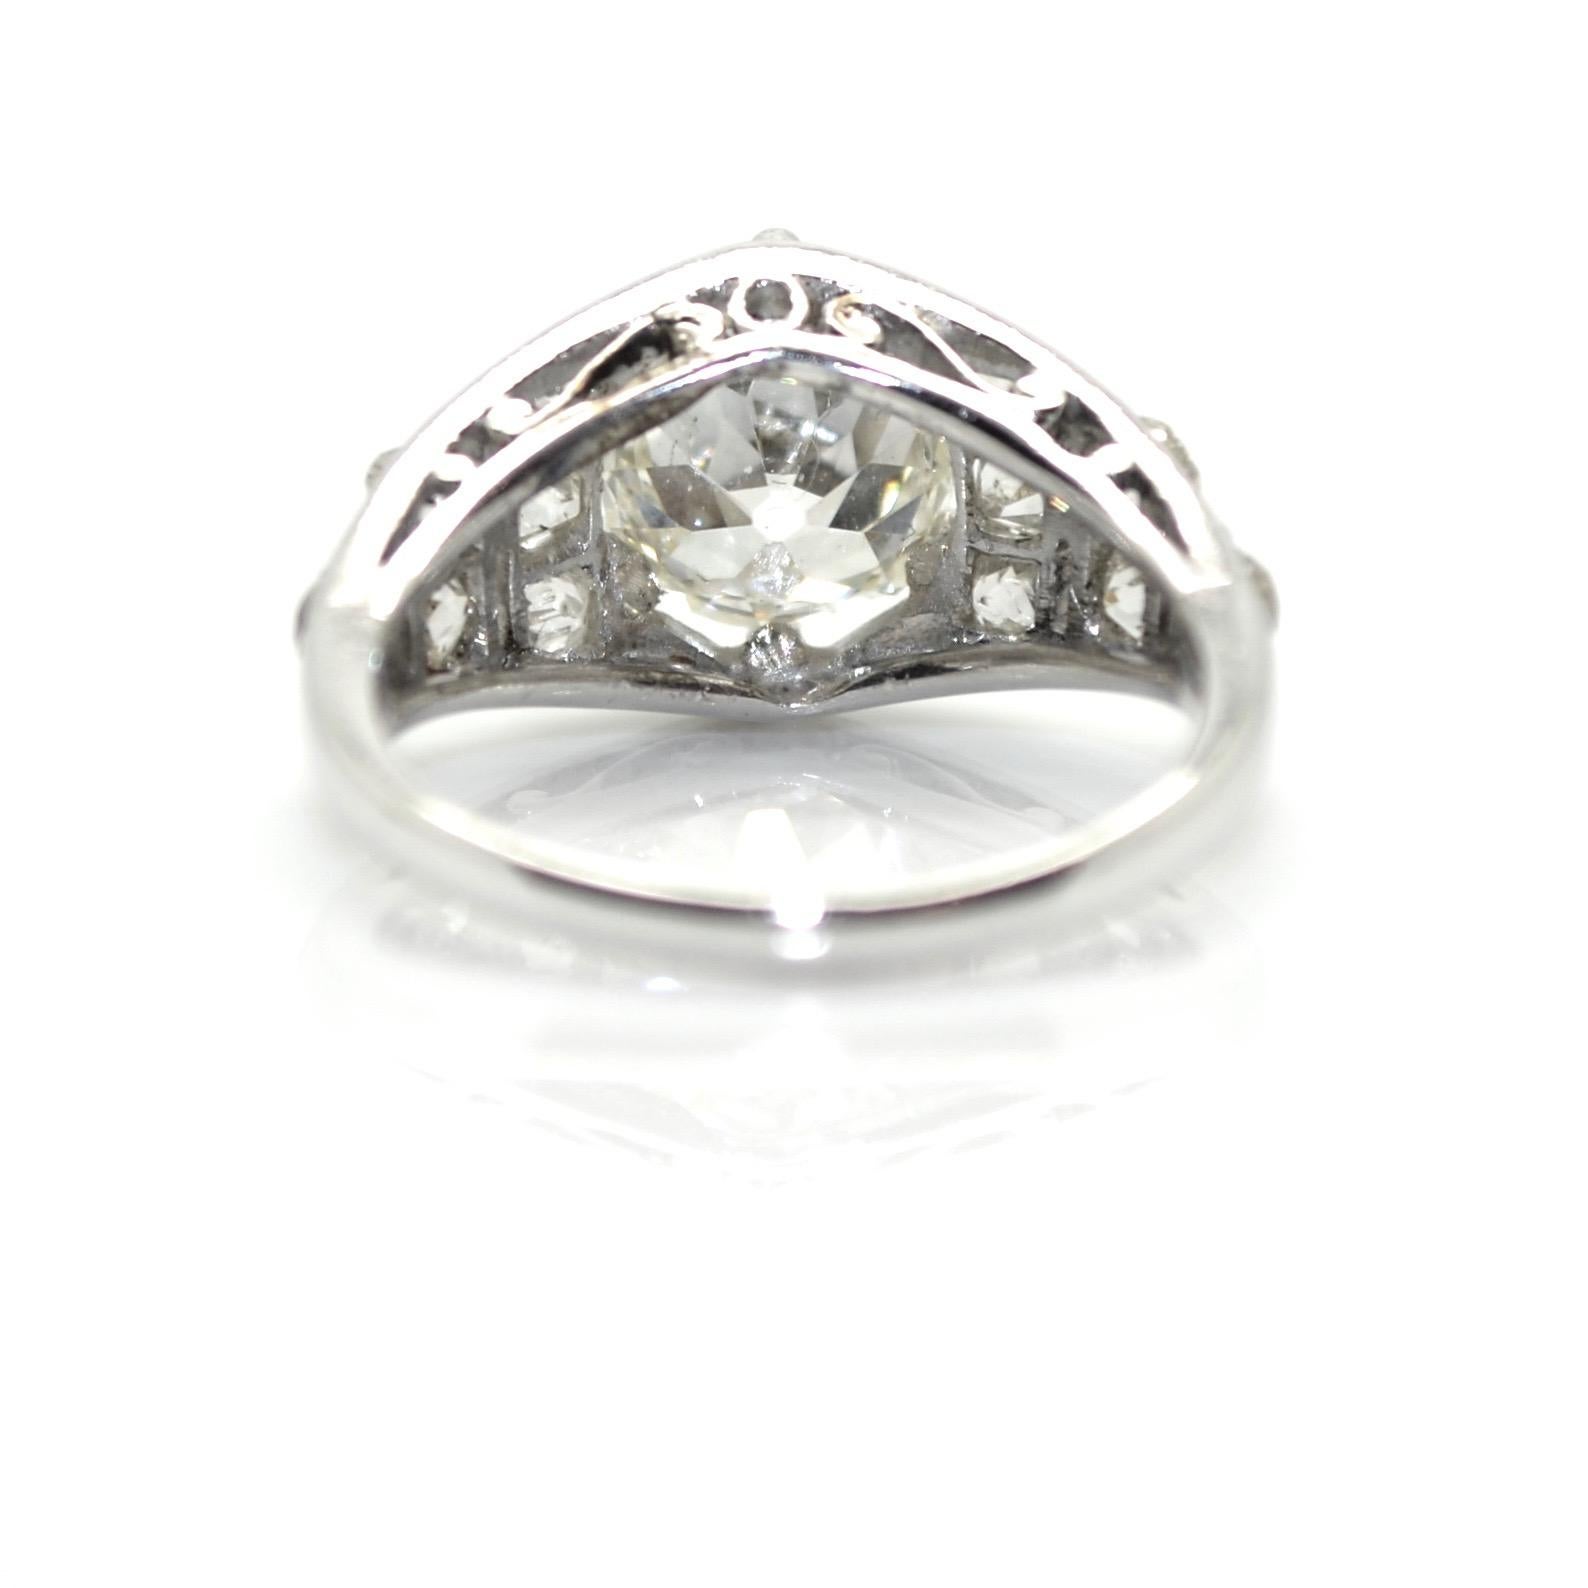 1920s French Art Deco 1.50 Carat Cushion Cut Diamond Platinum Ring In Good Condition For Sale In Paris, FR